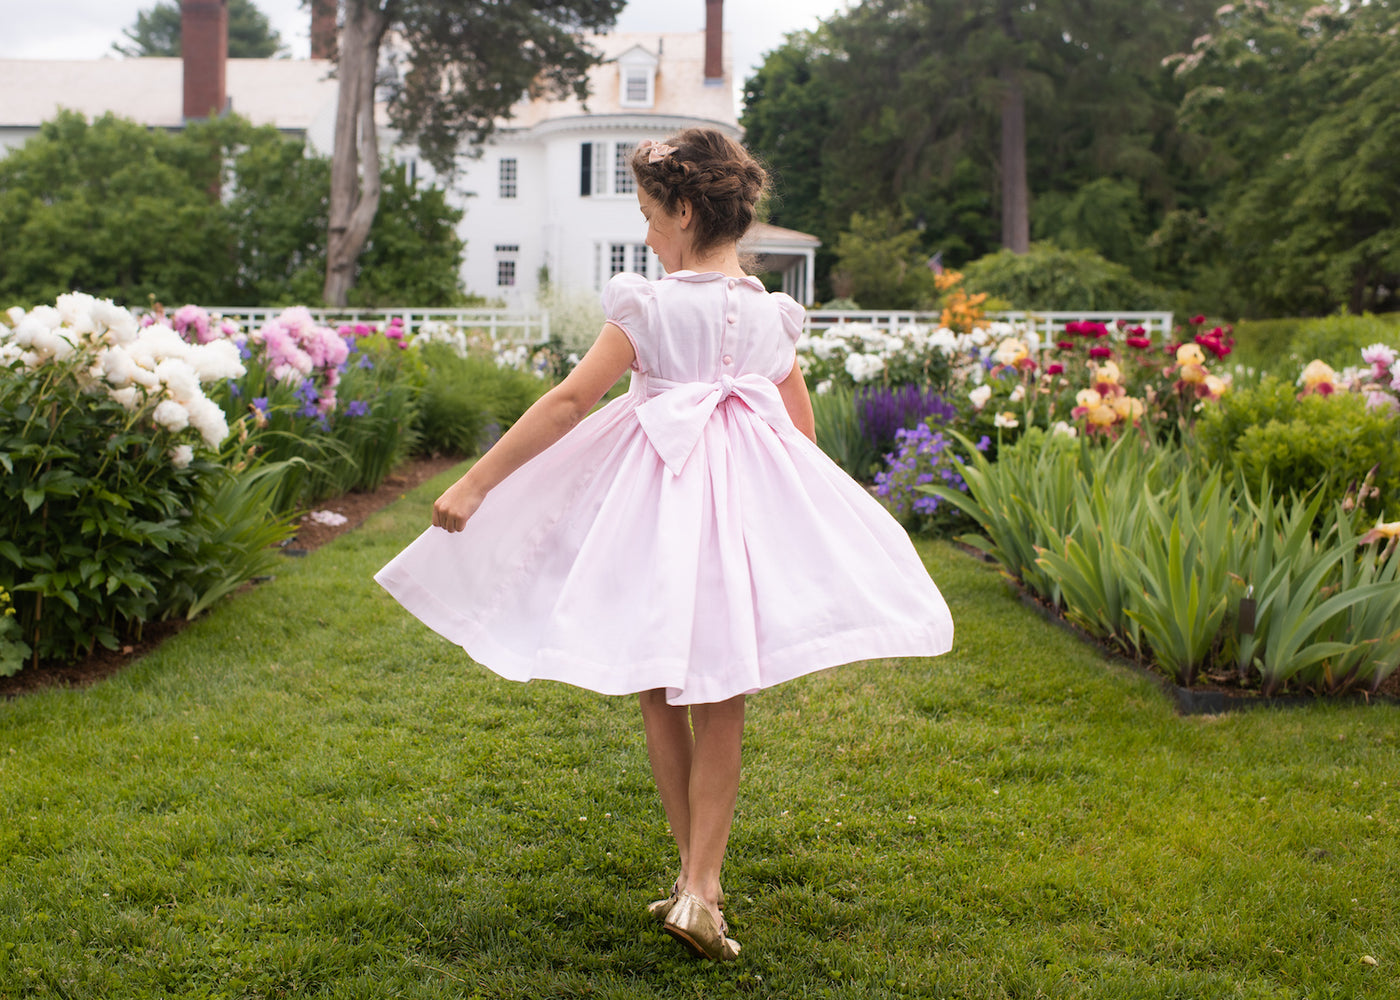 Classic chic romantic smocked dresses for babies and girl Paris boutique children clothing 